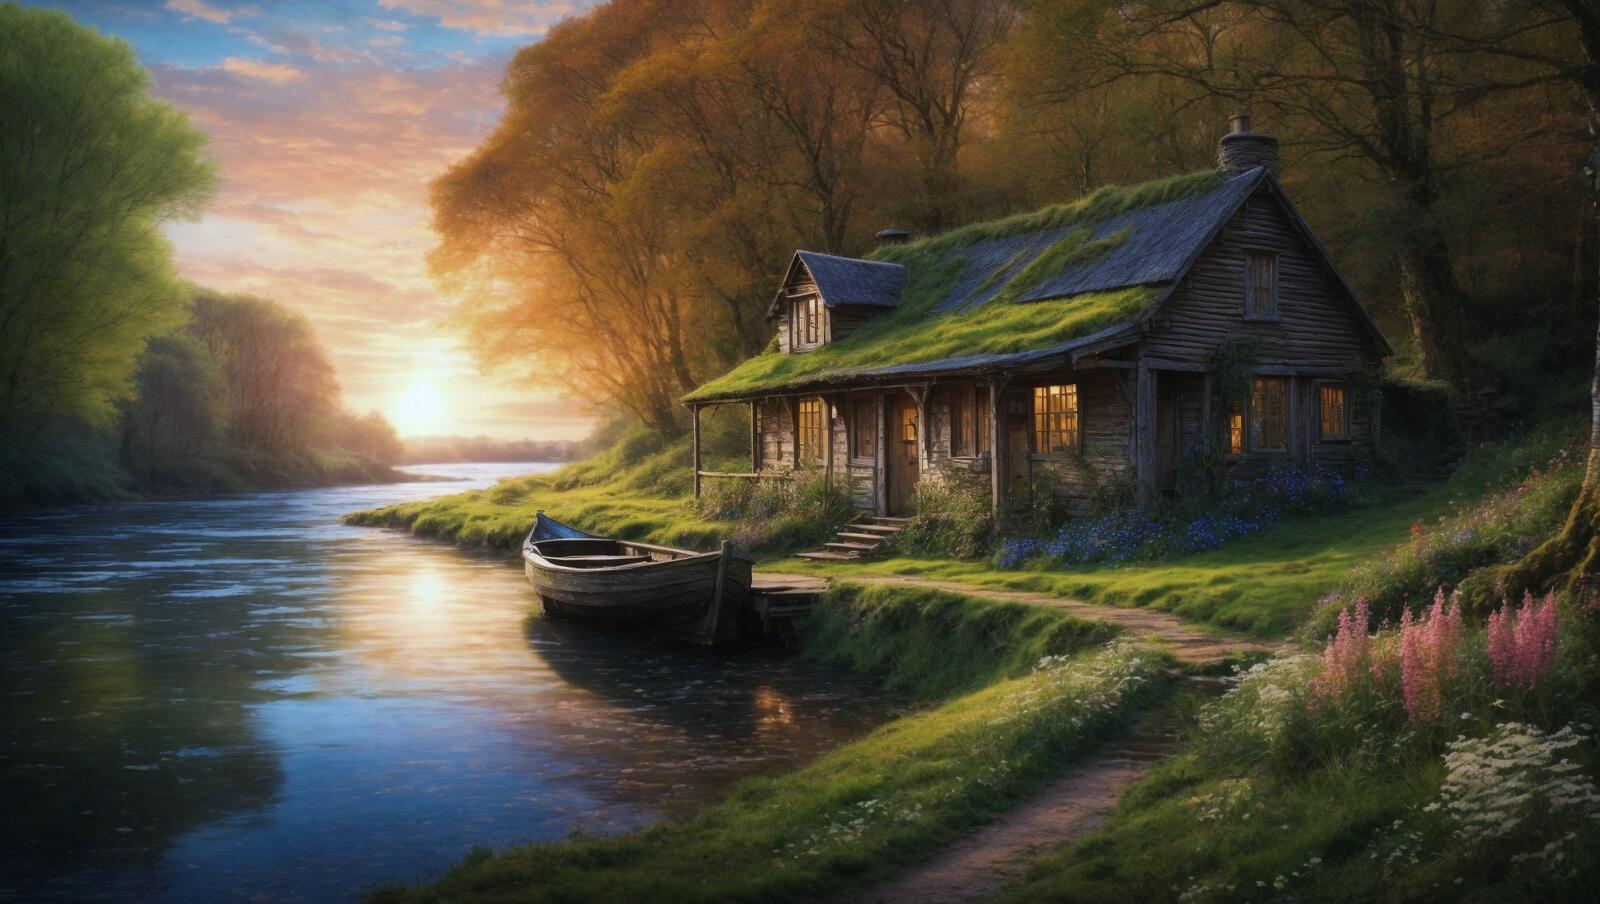 Free photo A painting of a boat at the edge of a river with a hut on the shore, on which is a sunlit lake